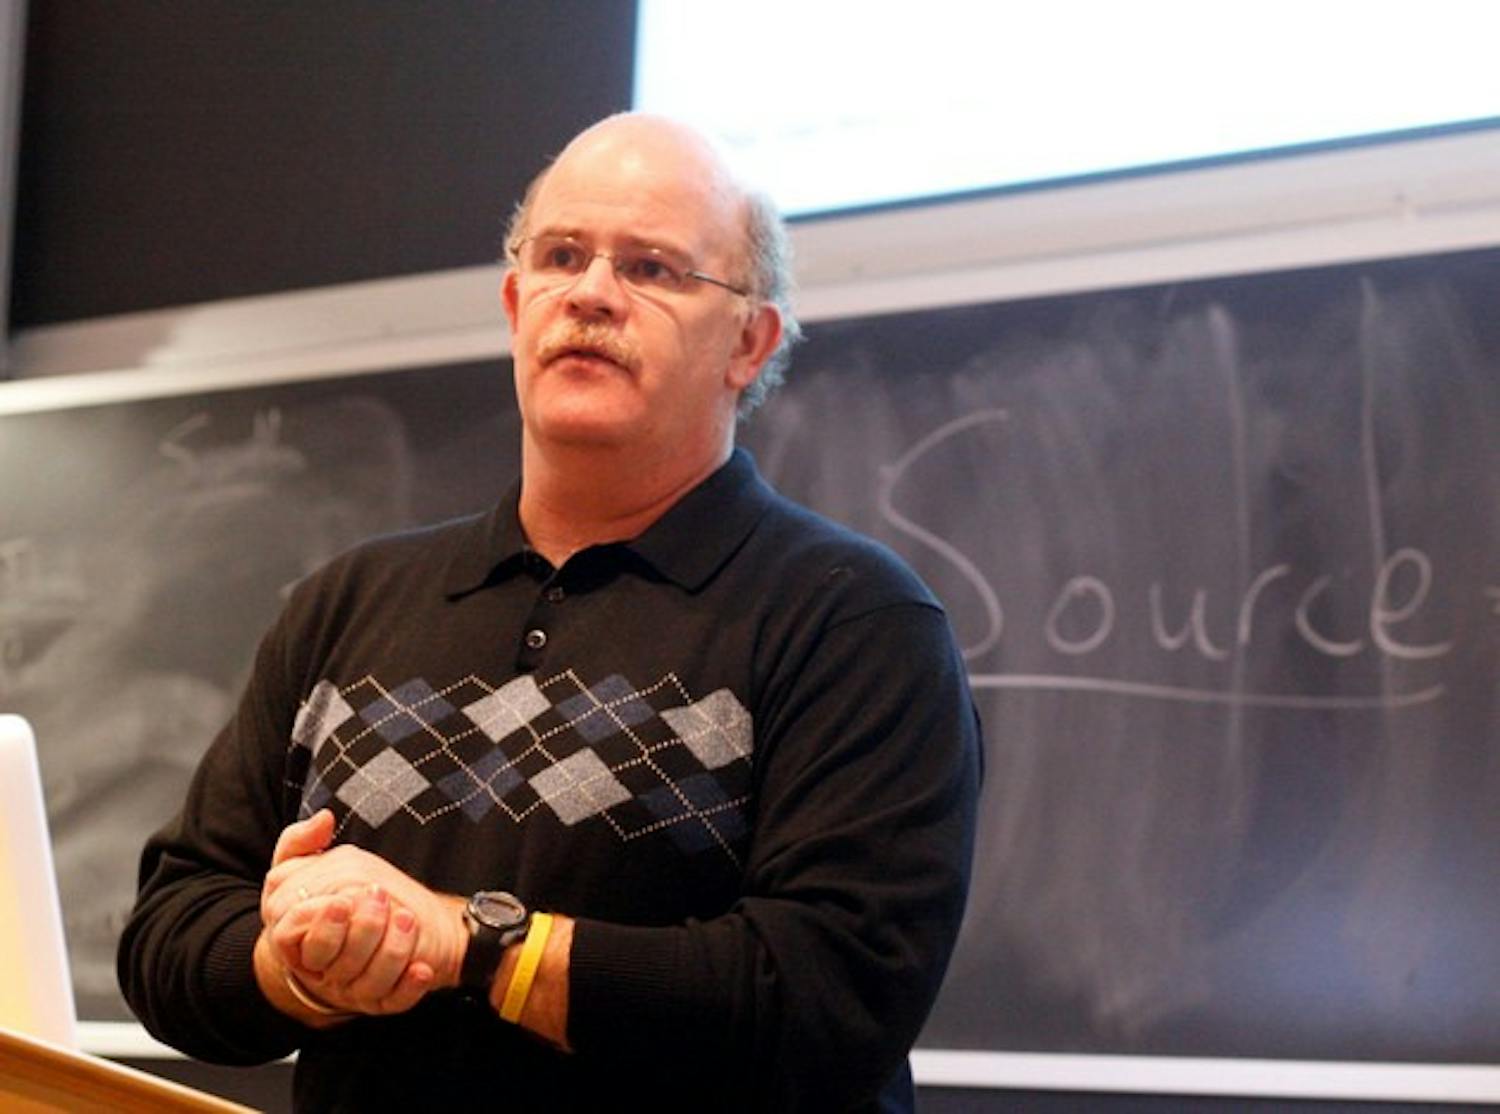 Rick Adams, a member of the Dartmouth's Home Team, discussed possible alterations and updatesto the Dartmouth web site, including updates to online campus maps, at a Web Town Meeting held on Monday.